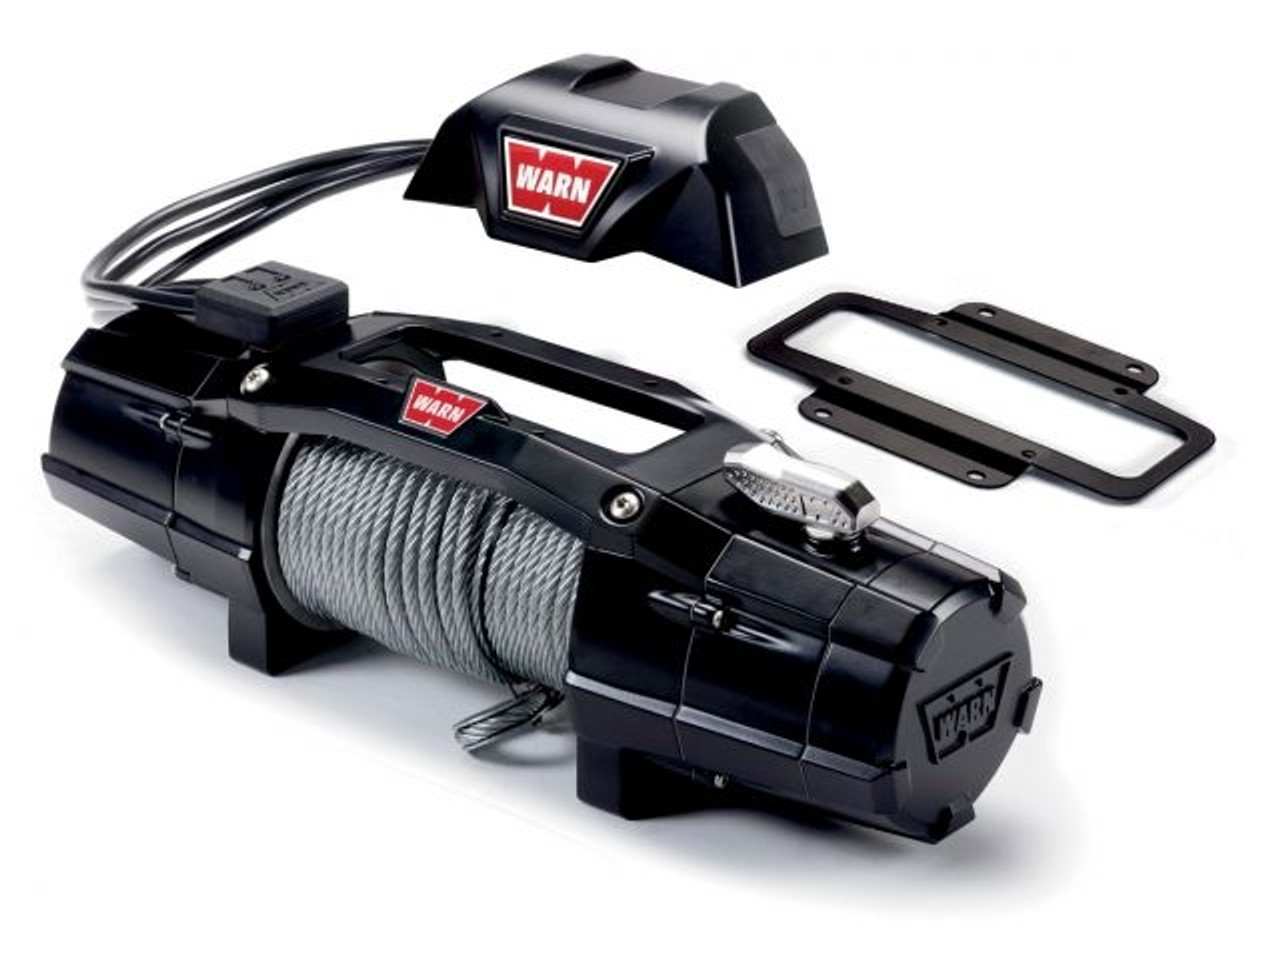 WARN 88980 ZEON Winch with 100' Wire Rope and Roller Fairlead